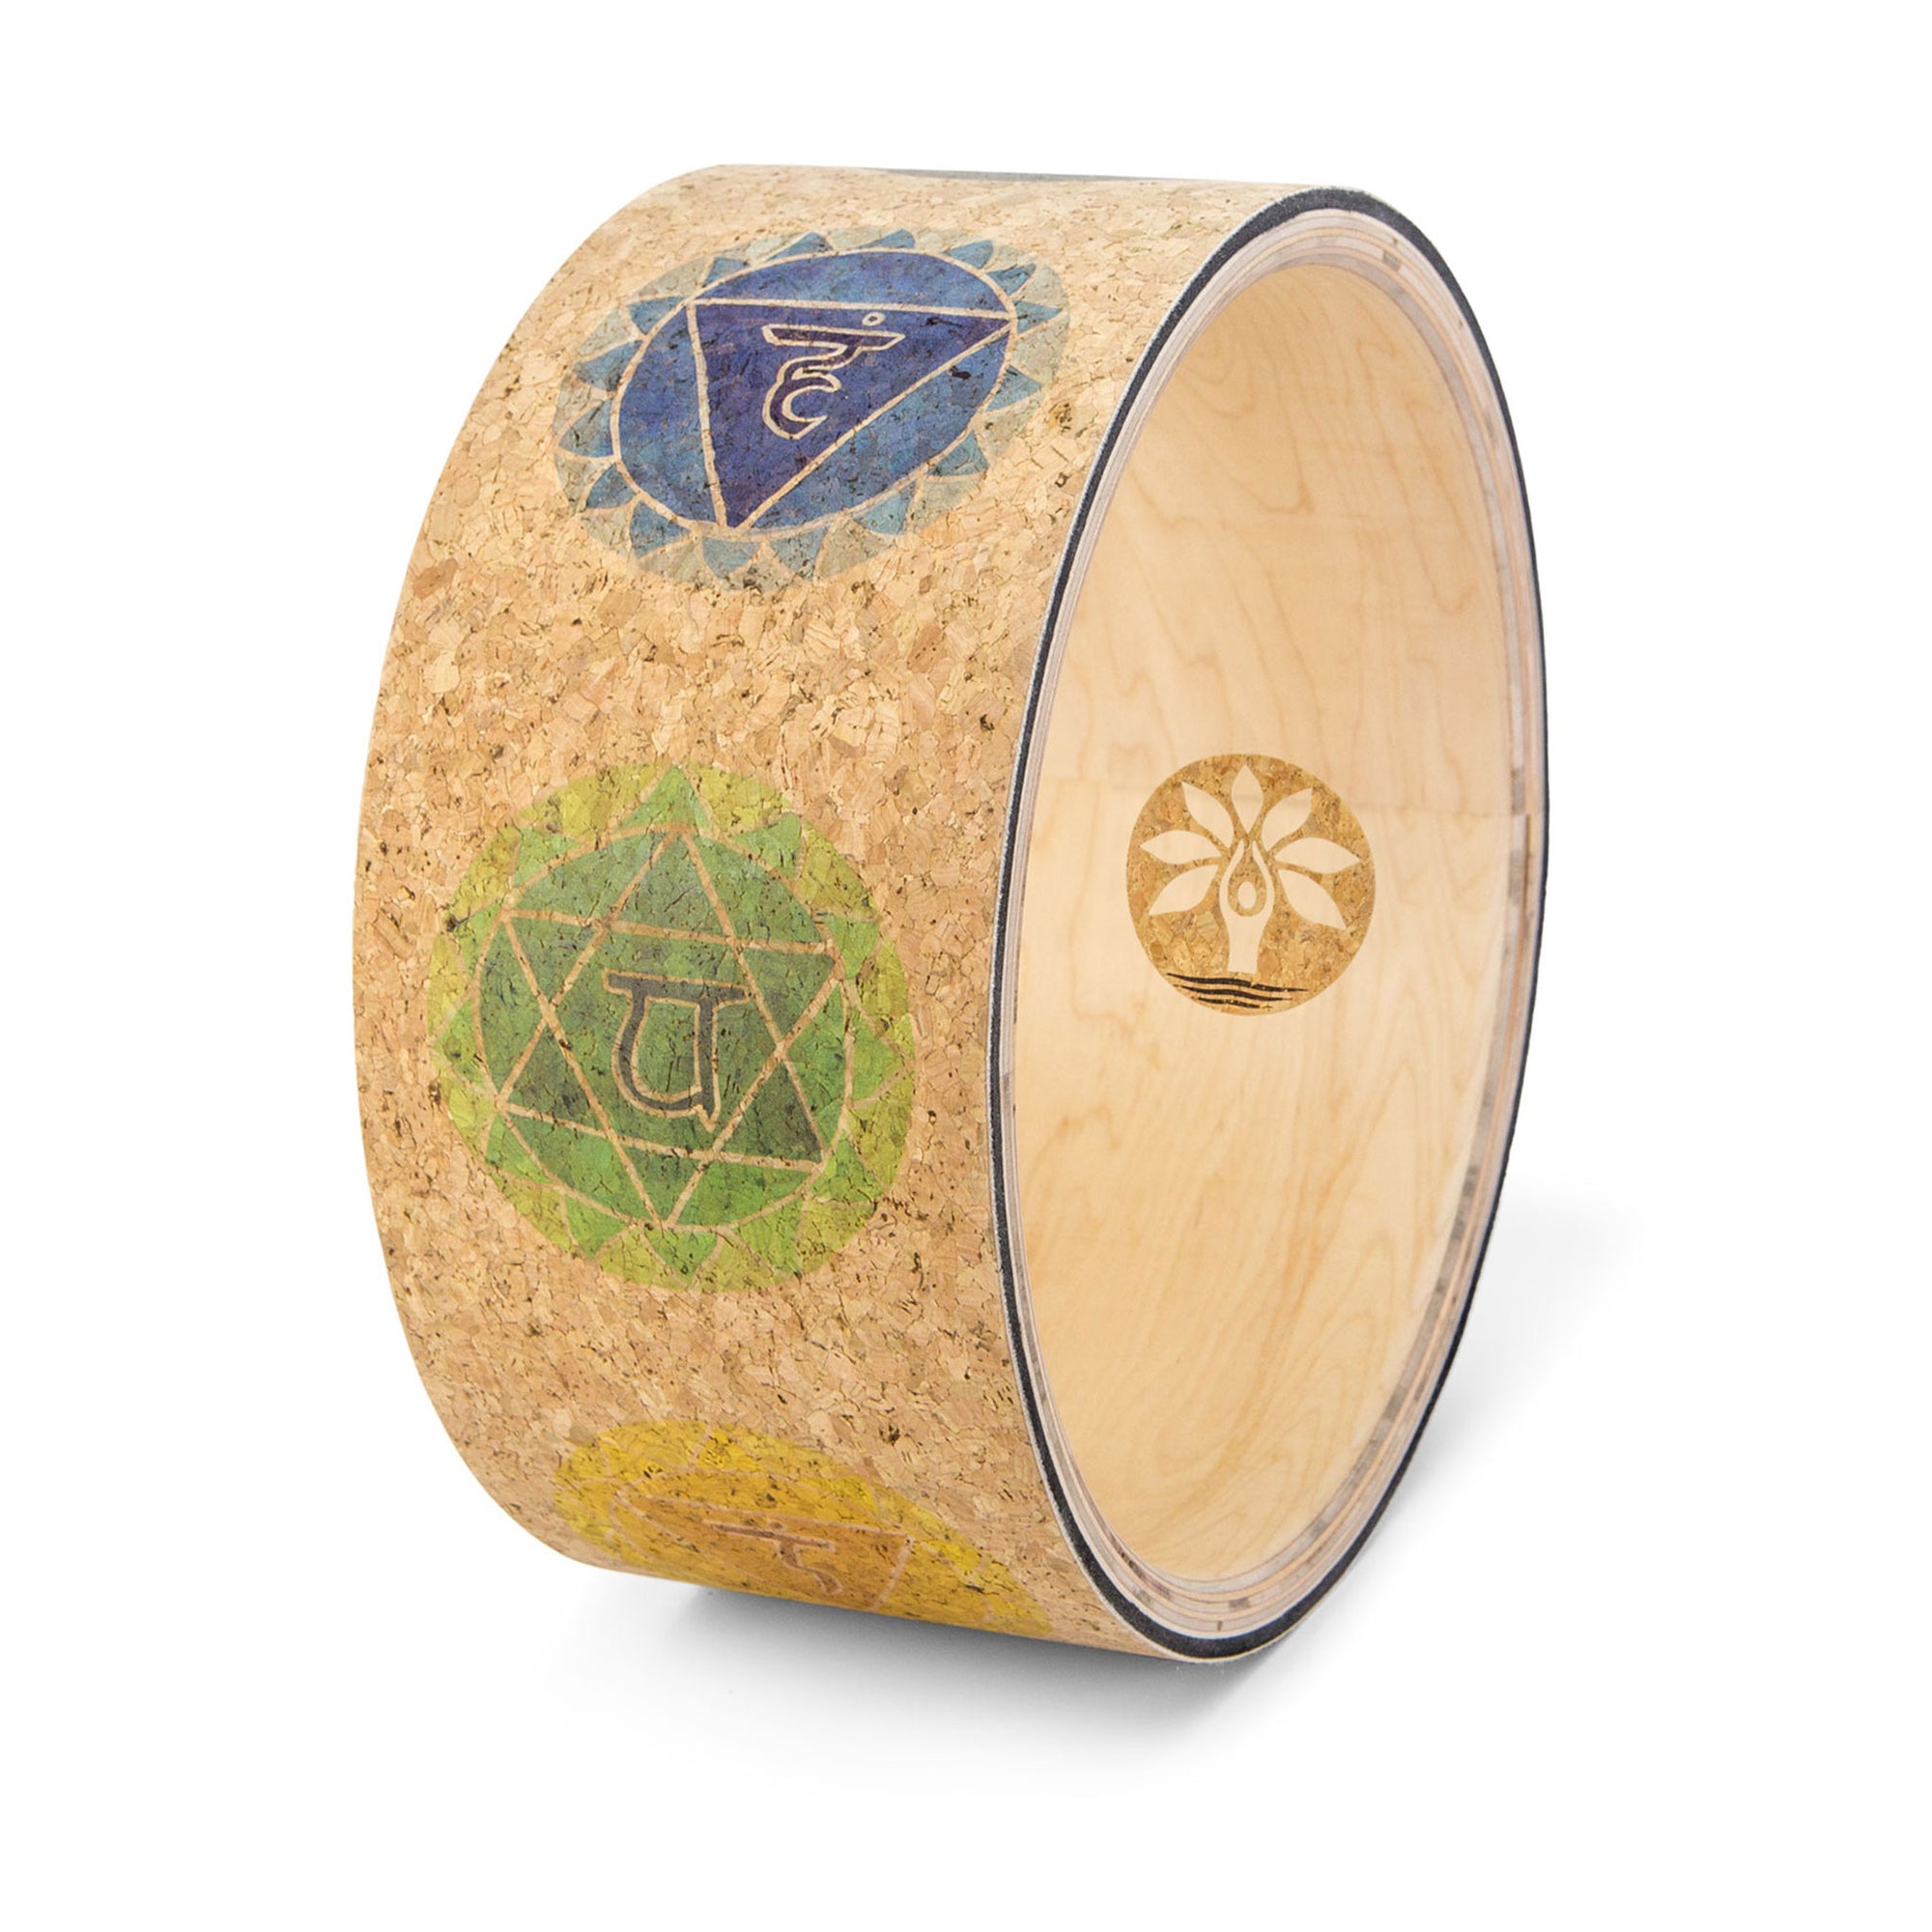 The Best Yoga Wheel - Handmade with Eco-Friendly Cork and Wood